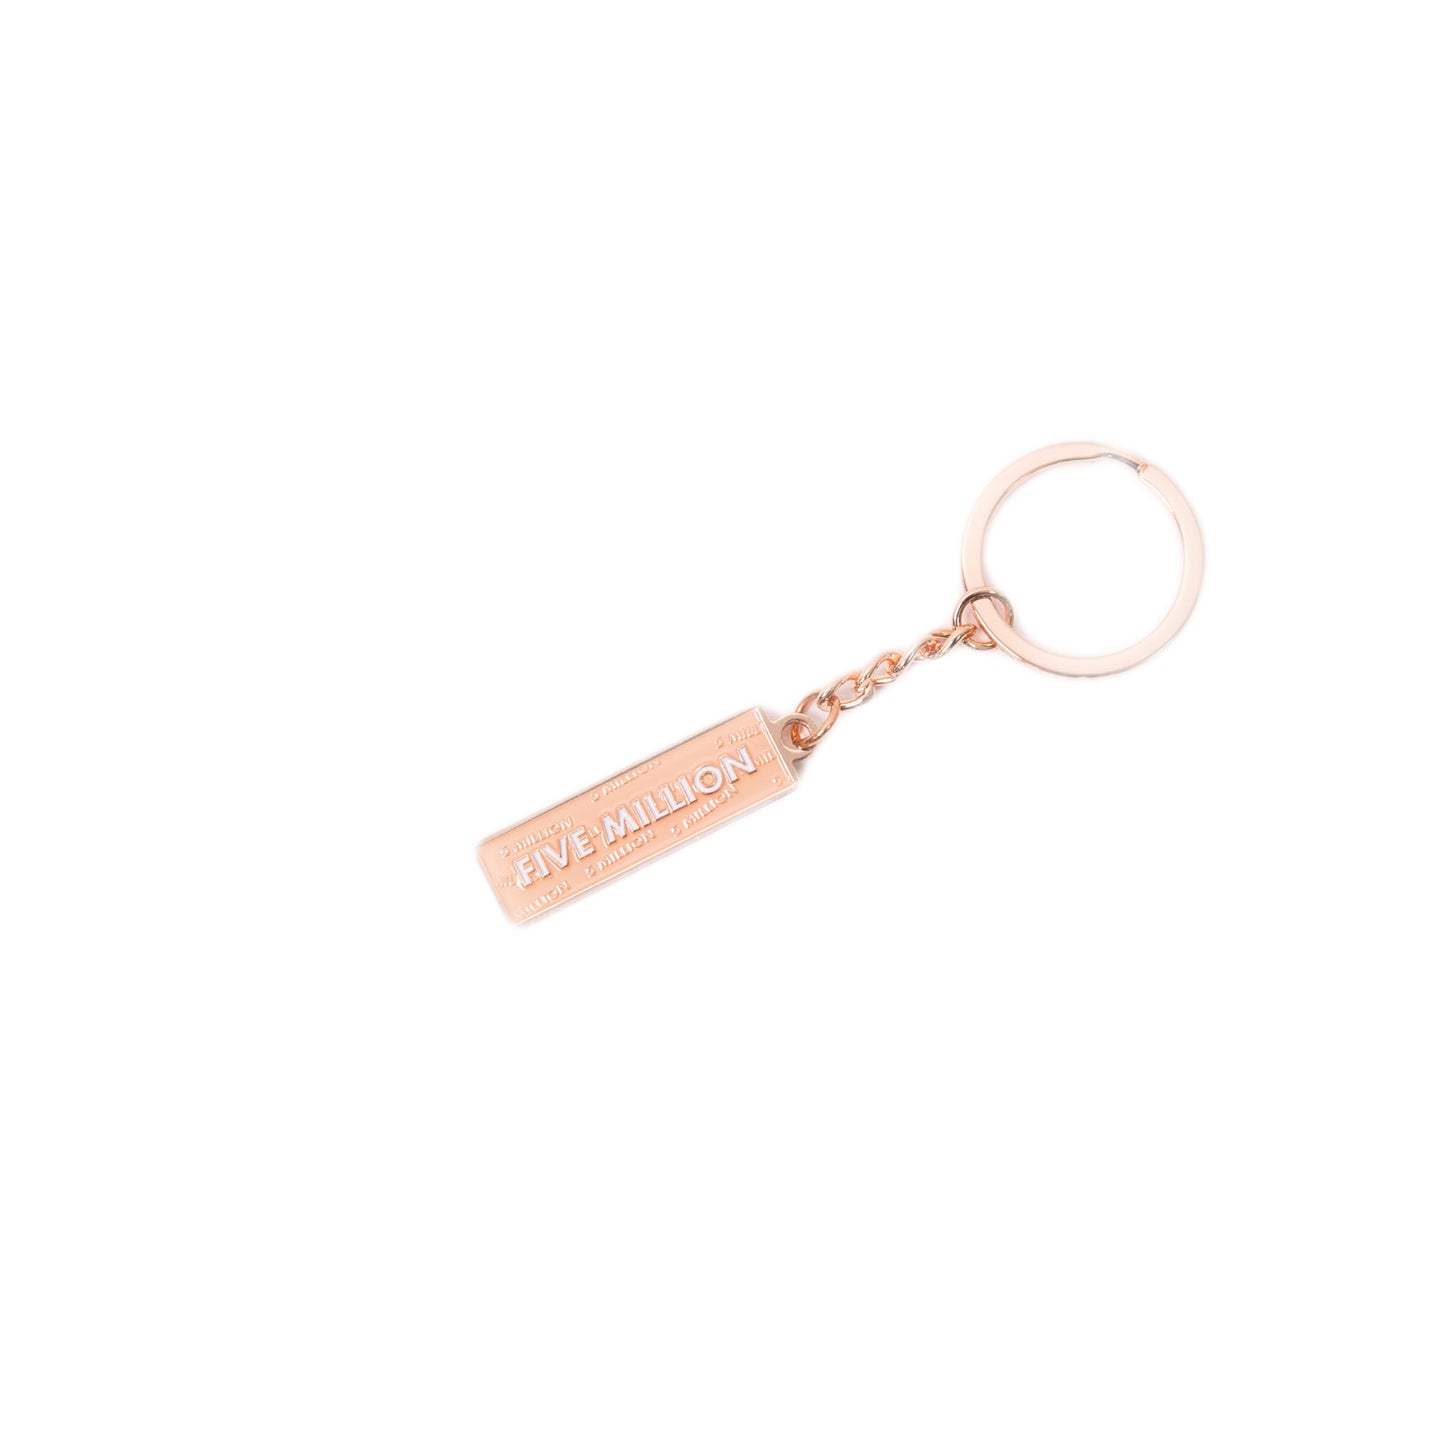 [SPRING SPECIAL] 5 MILLION SUBSCRIBERS ROSE GOLD KEYCHAIN